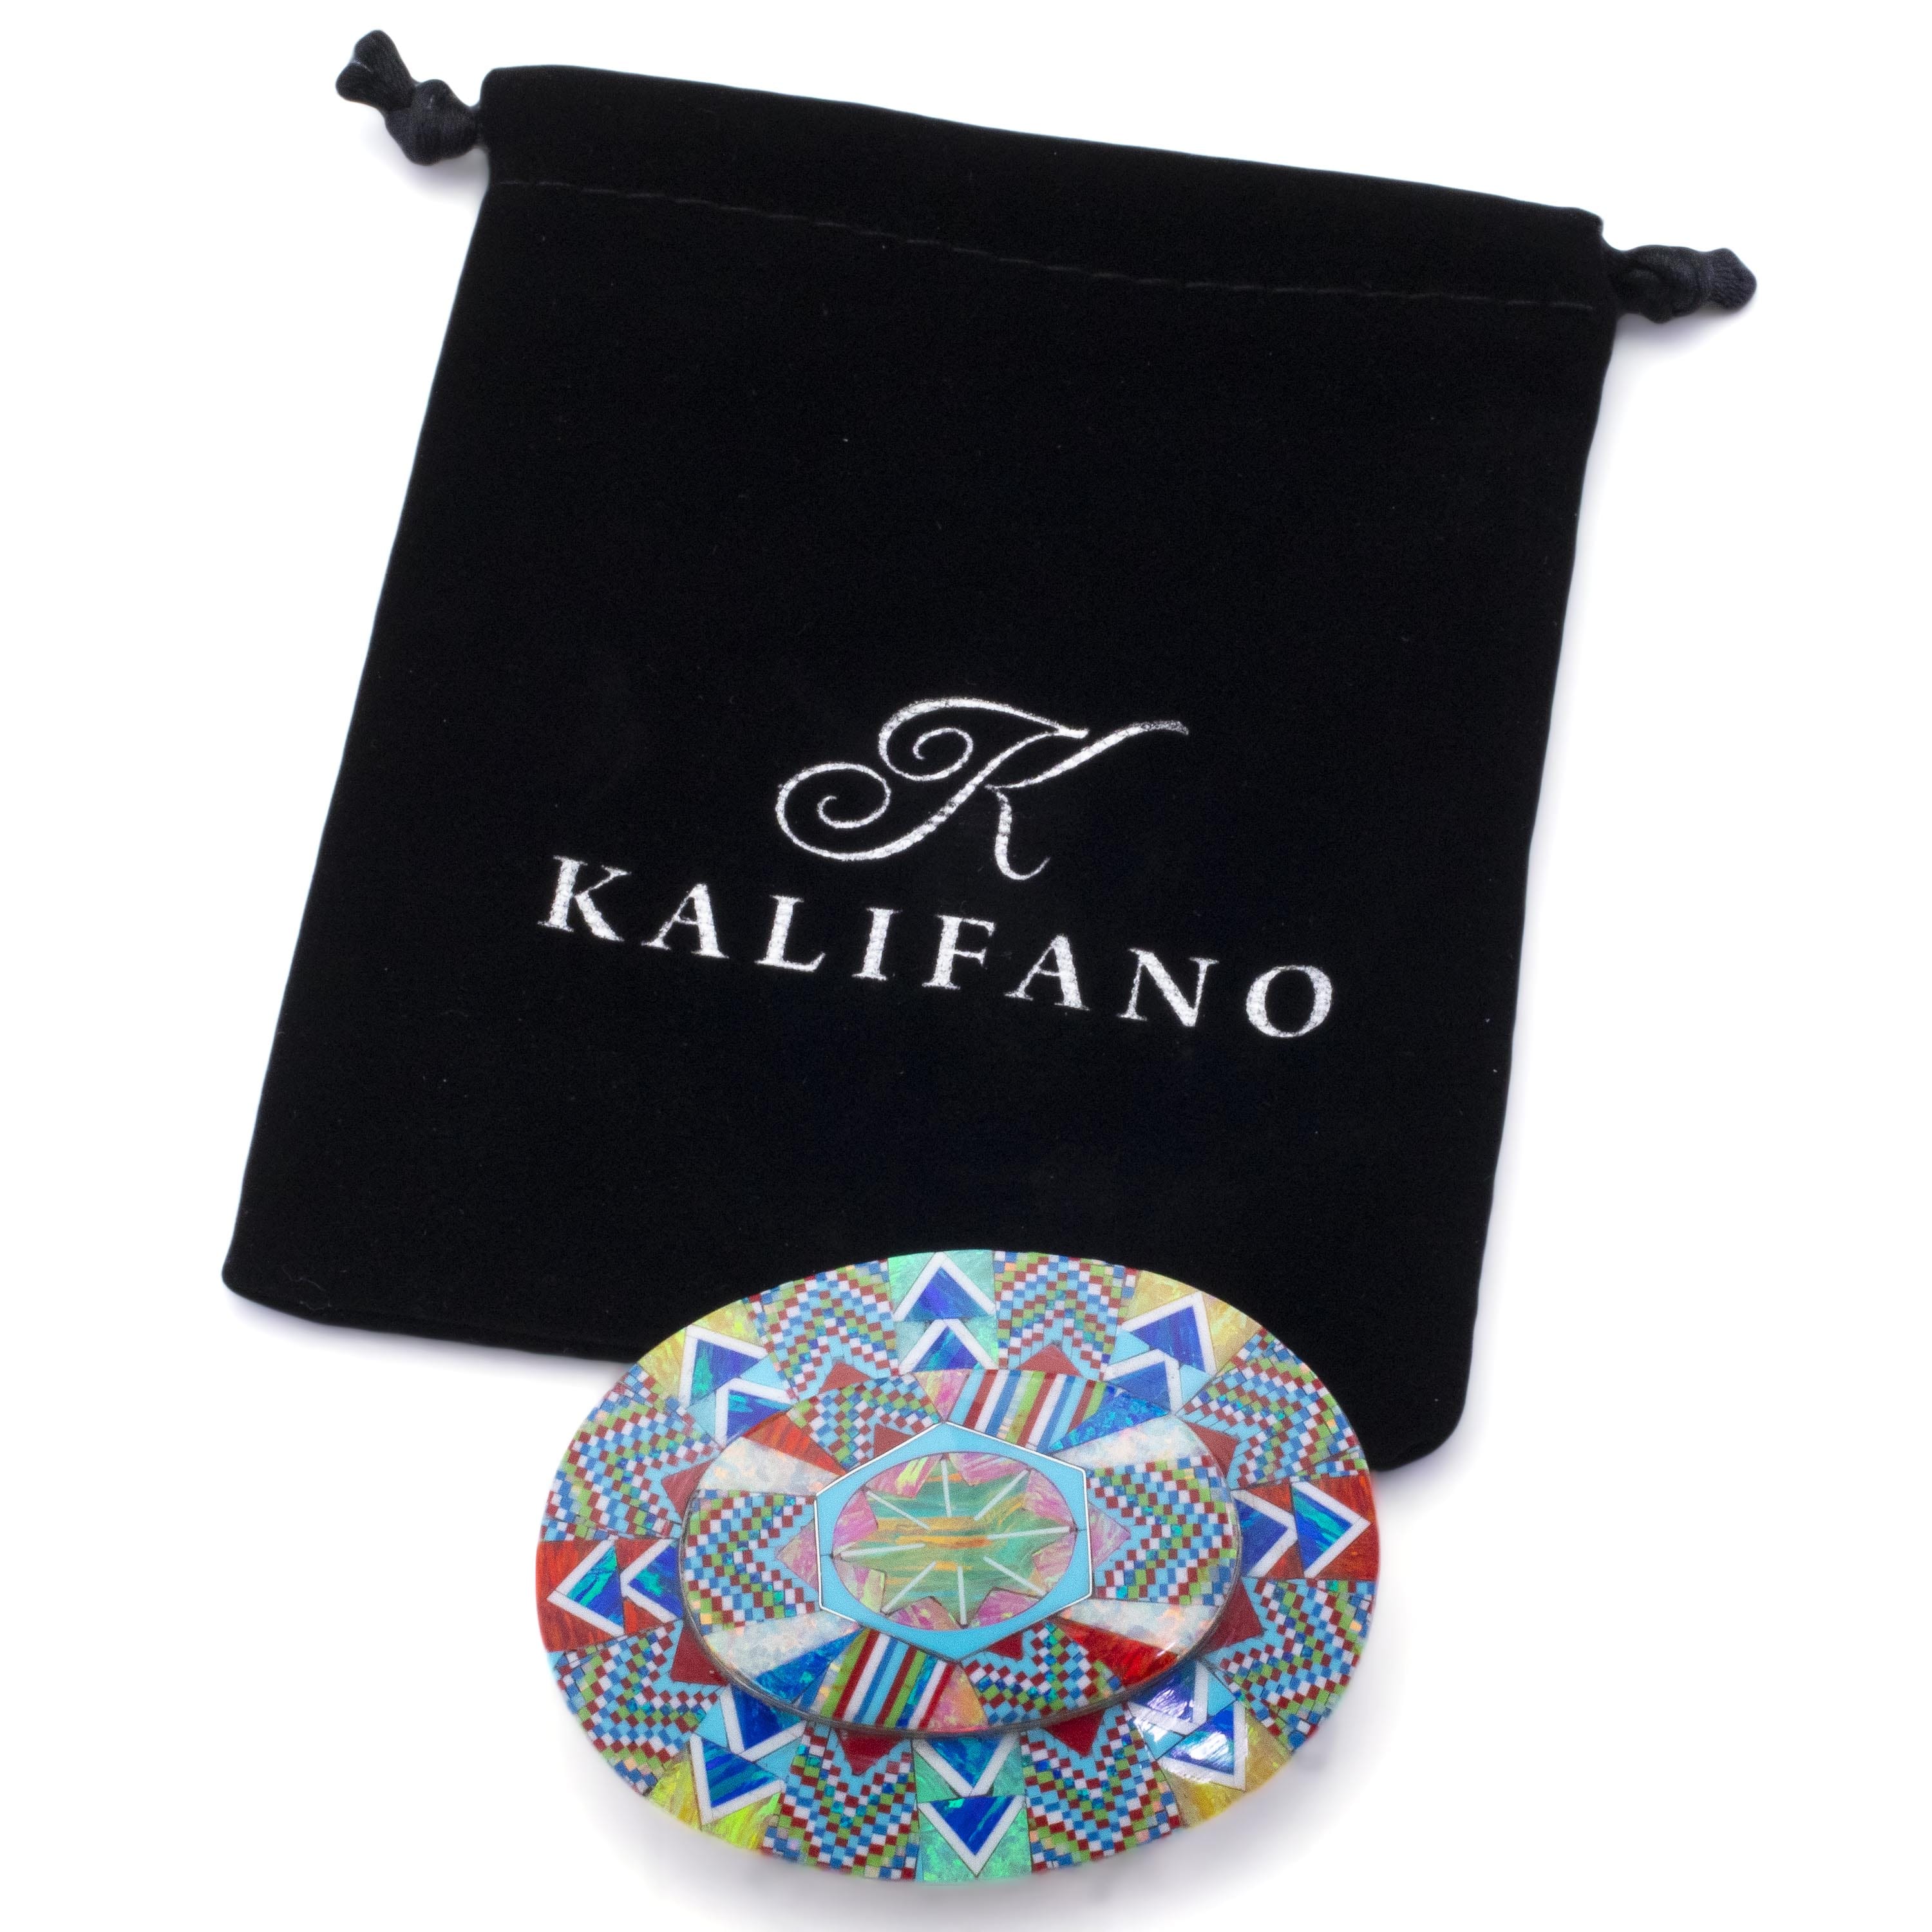 KALIFANO Southwest Silver Jewelry Multi Gem Opal Micro Inlay with Genuine Turquoise and Coral Handmade 925 Sterling Silver Oval Belt Buckle AKBB1200.001